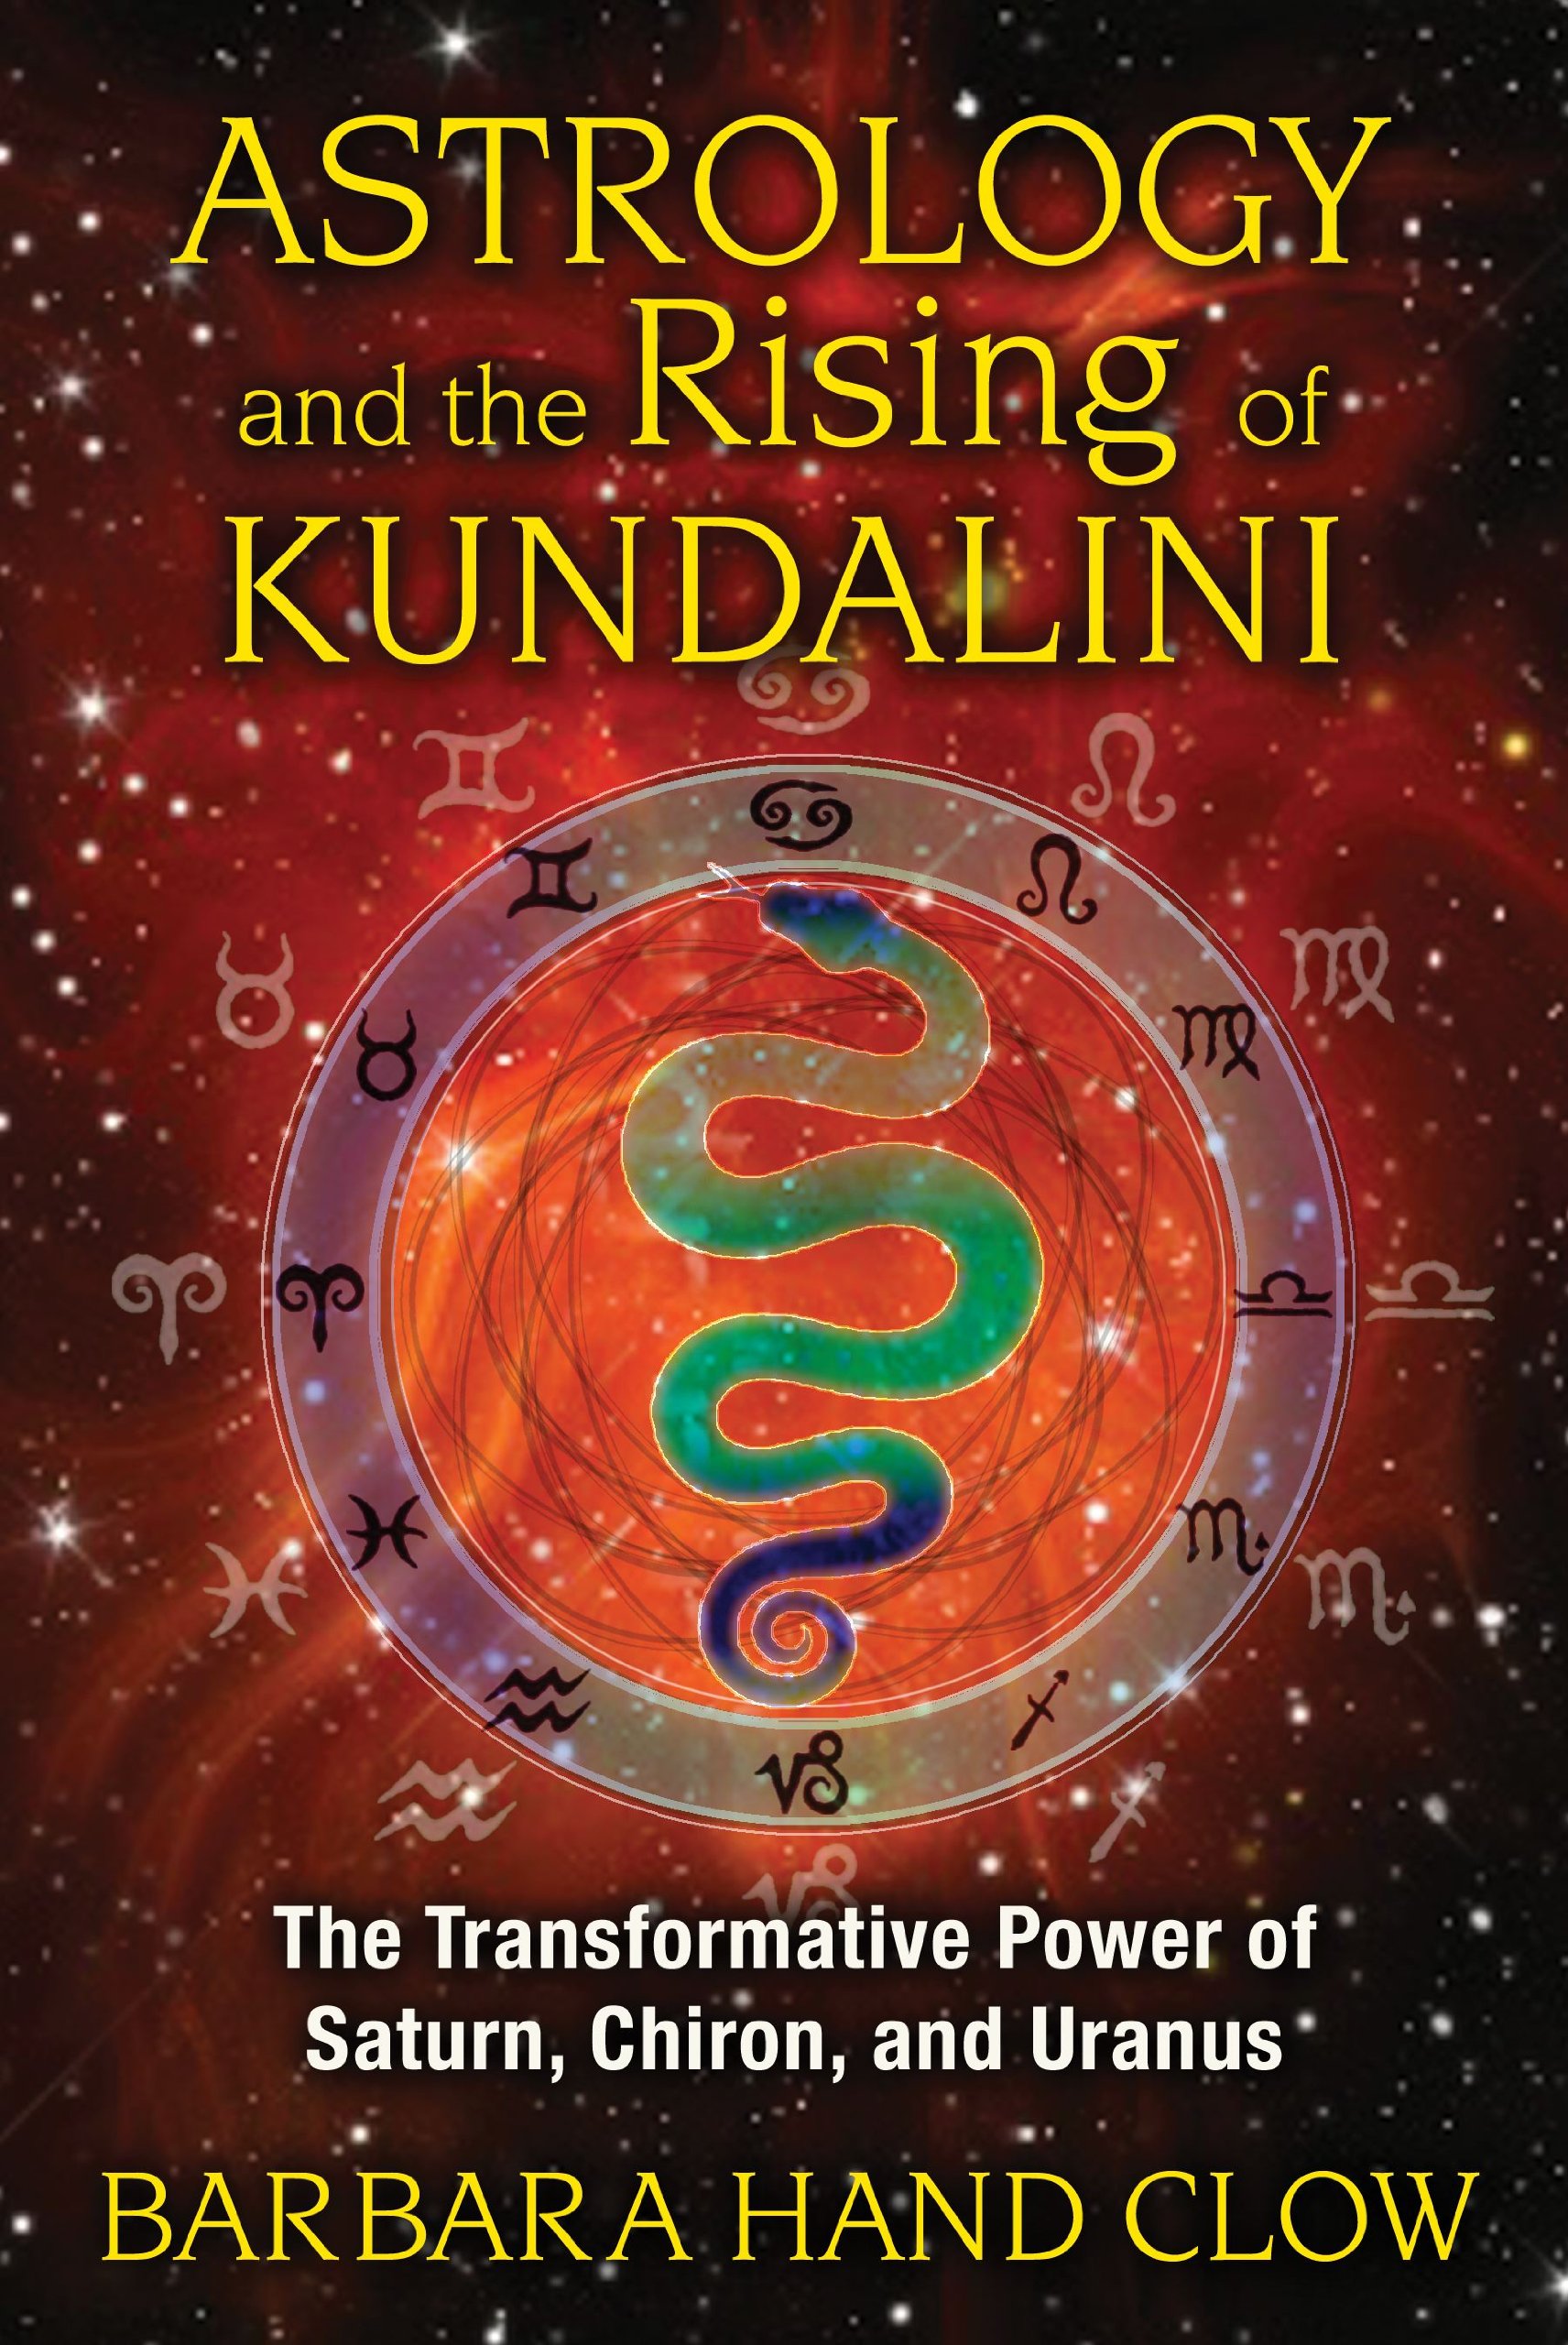 Astrology and the Rising of Kundalini: The Transformative Power of Saturn, Chiron, and Uranus (Copy) (Copy)